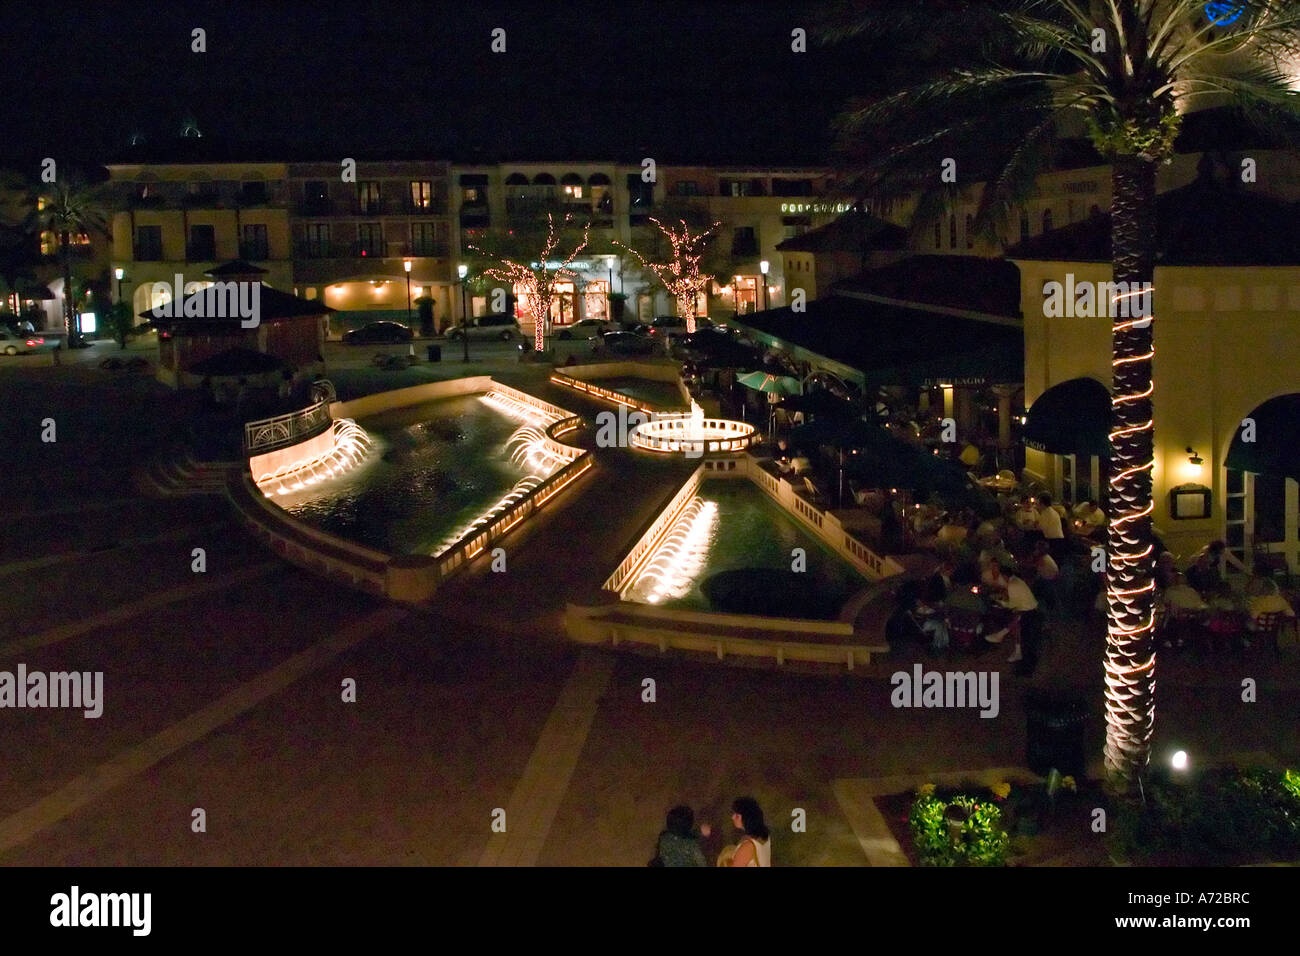 Night view of rear of Harriet Himmel Gilman Theater and Il Bellagio restaurant and fountain City Place West Palm Beach Florida Stock Photo